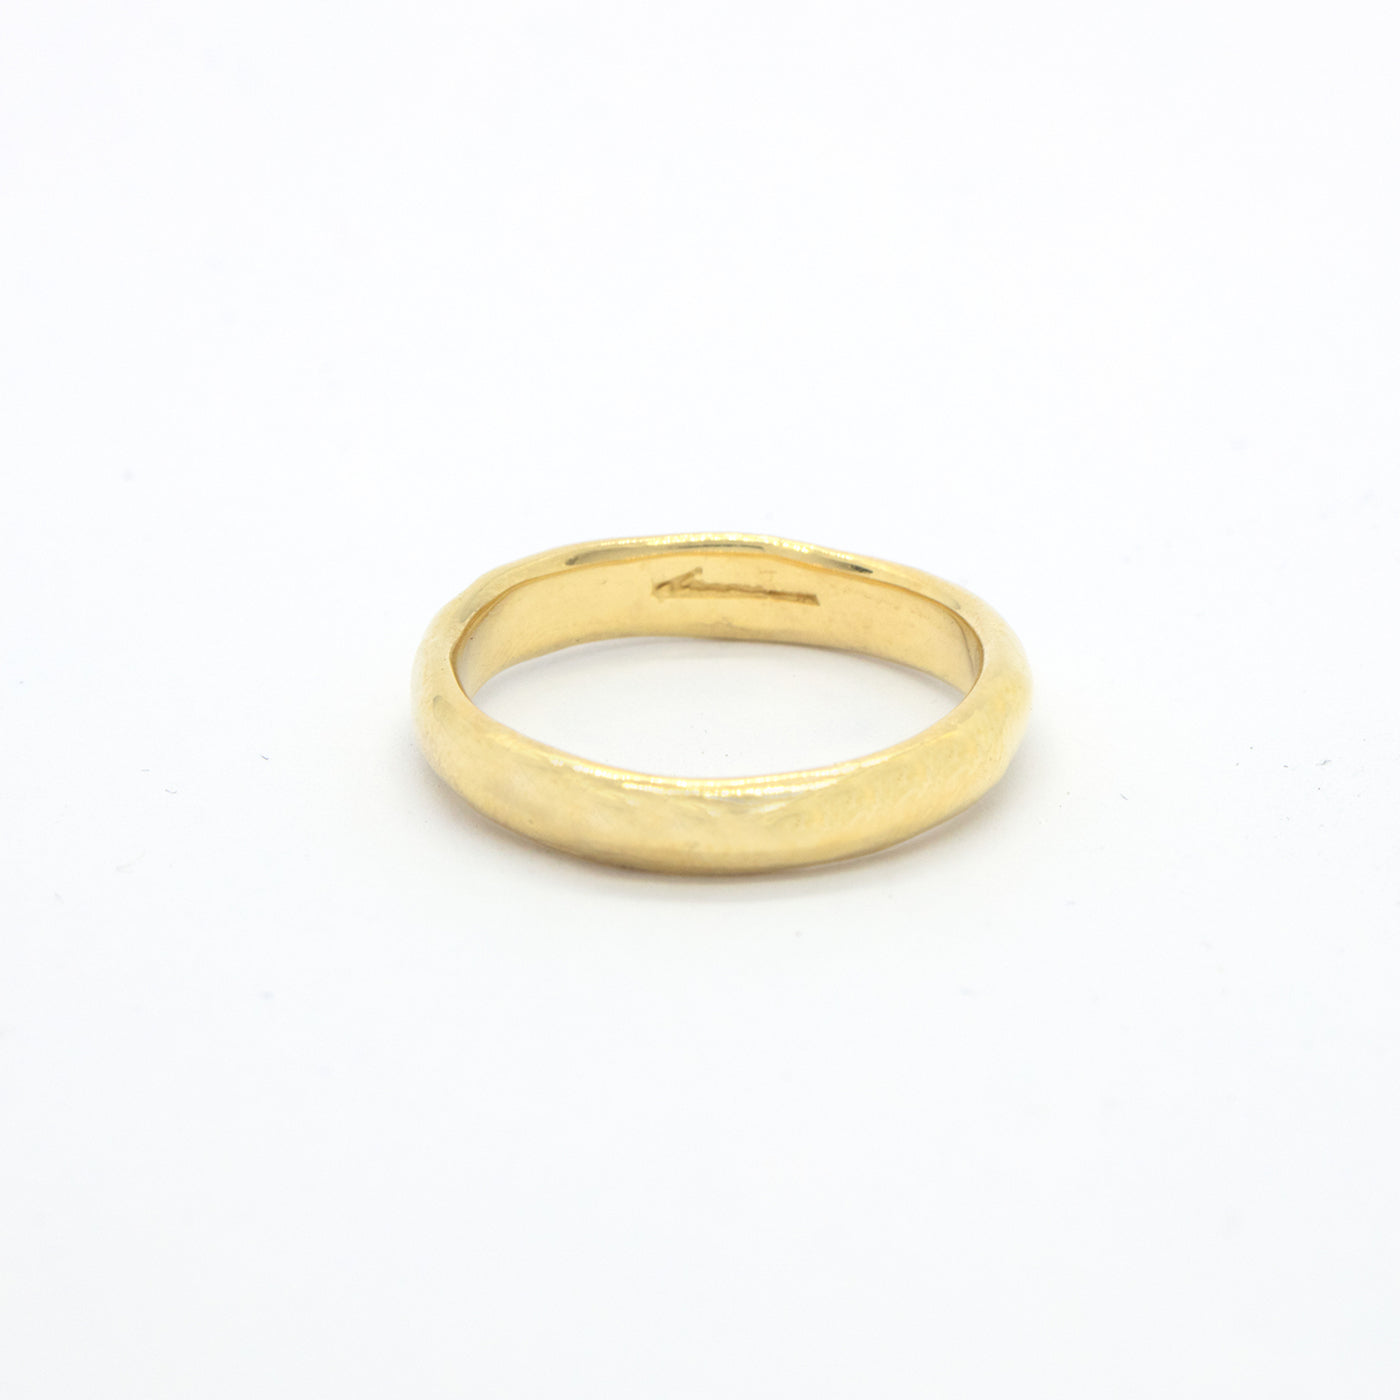 Ring Tara Wedding Band for Him 14ct or 18ct yellow gold product view innan jewellery independent atelier berlin